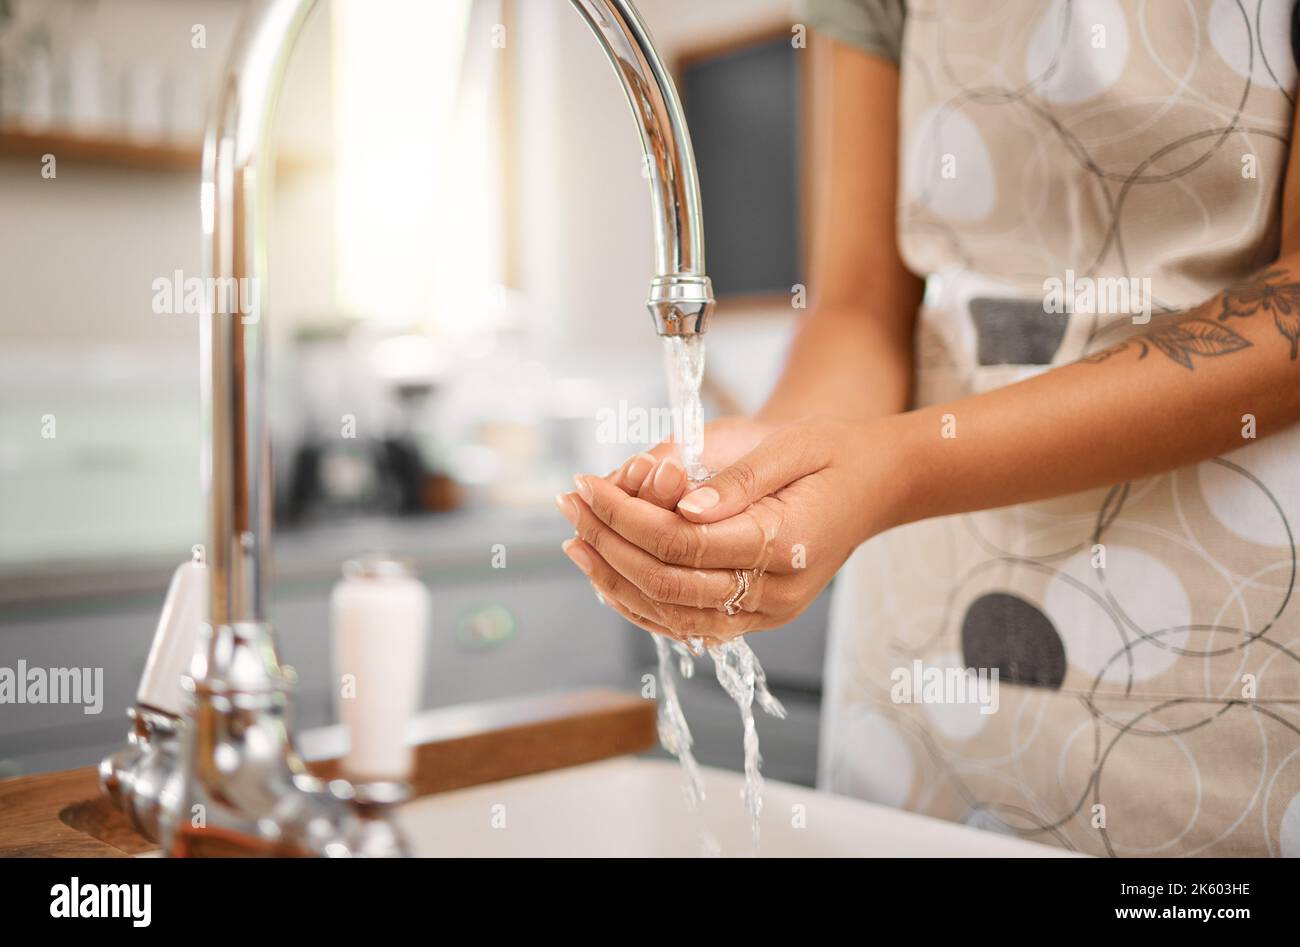 https://c8.alamy.com/comp/2K603HE/close-up-of-woman-washing-her-hands-in-sink-with-tap-water-in-the-kitchen-at-home-always-wash-your-hands-before-cooking-2K603HE.jpg